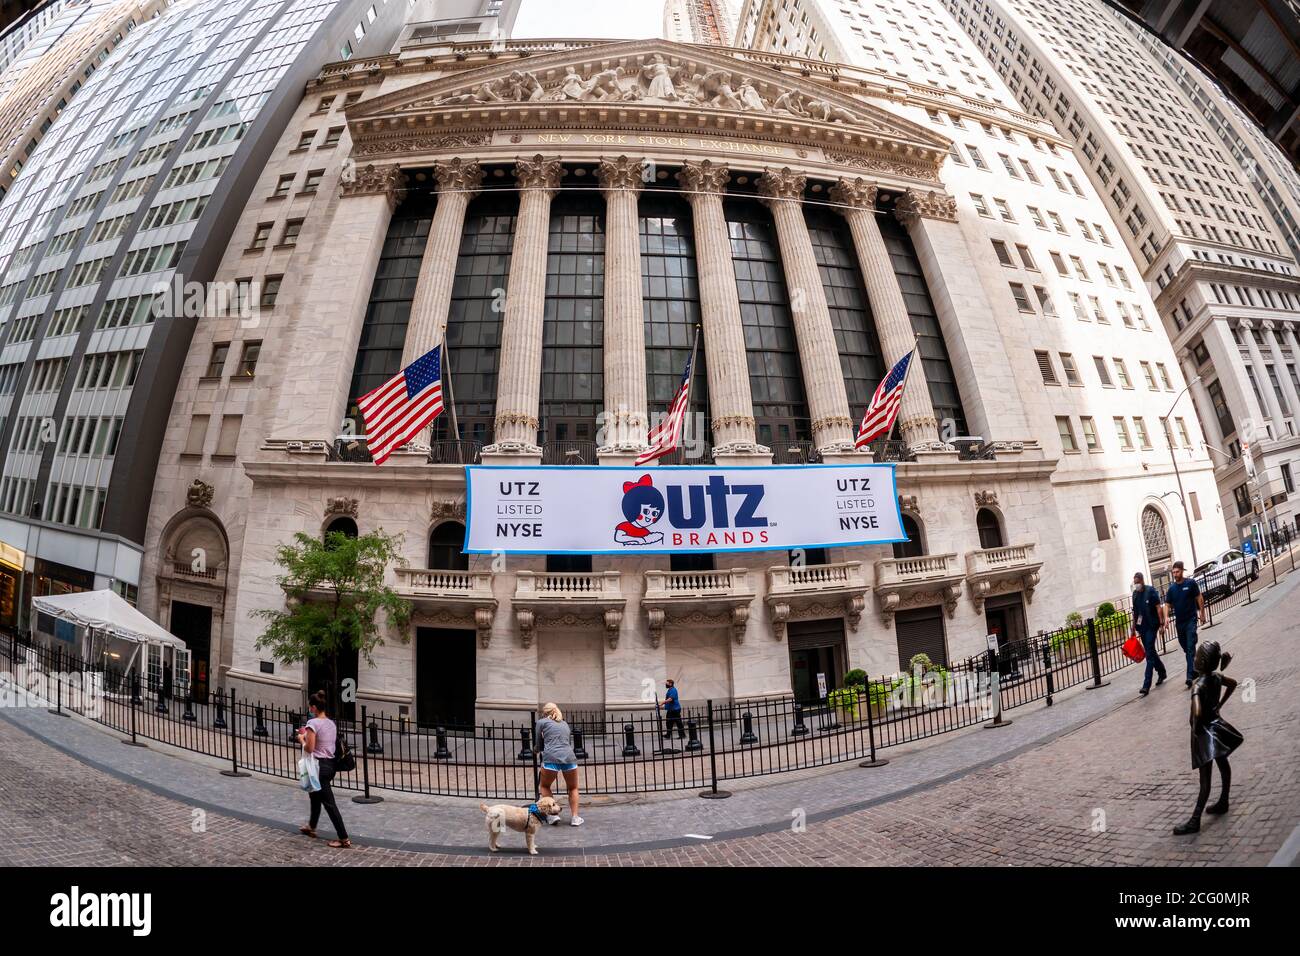 The New York Stock Exchange in New York is decorated on Monday, August 31, 2020 for the initial public offering of Utz Quality Foods. The 99 year-old family owned company gained market share during the pandemic as consumers, locked down and bored, gorged on its snack brands. In addition to the IPO, action at the NYSE includes changes to how the Dow Jones Industrial Average is calculated take place today. (© Richard B. Levine) Stock Photo